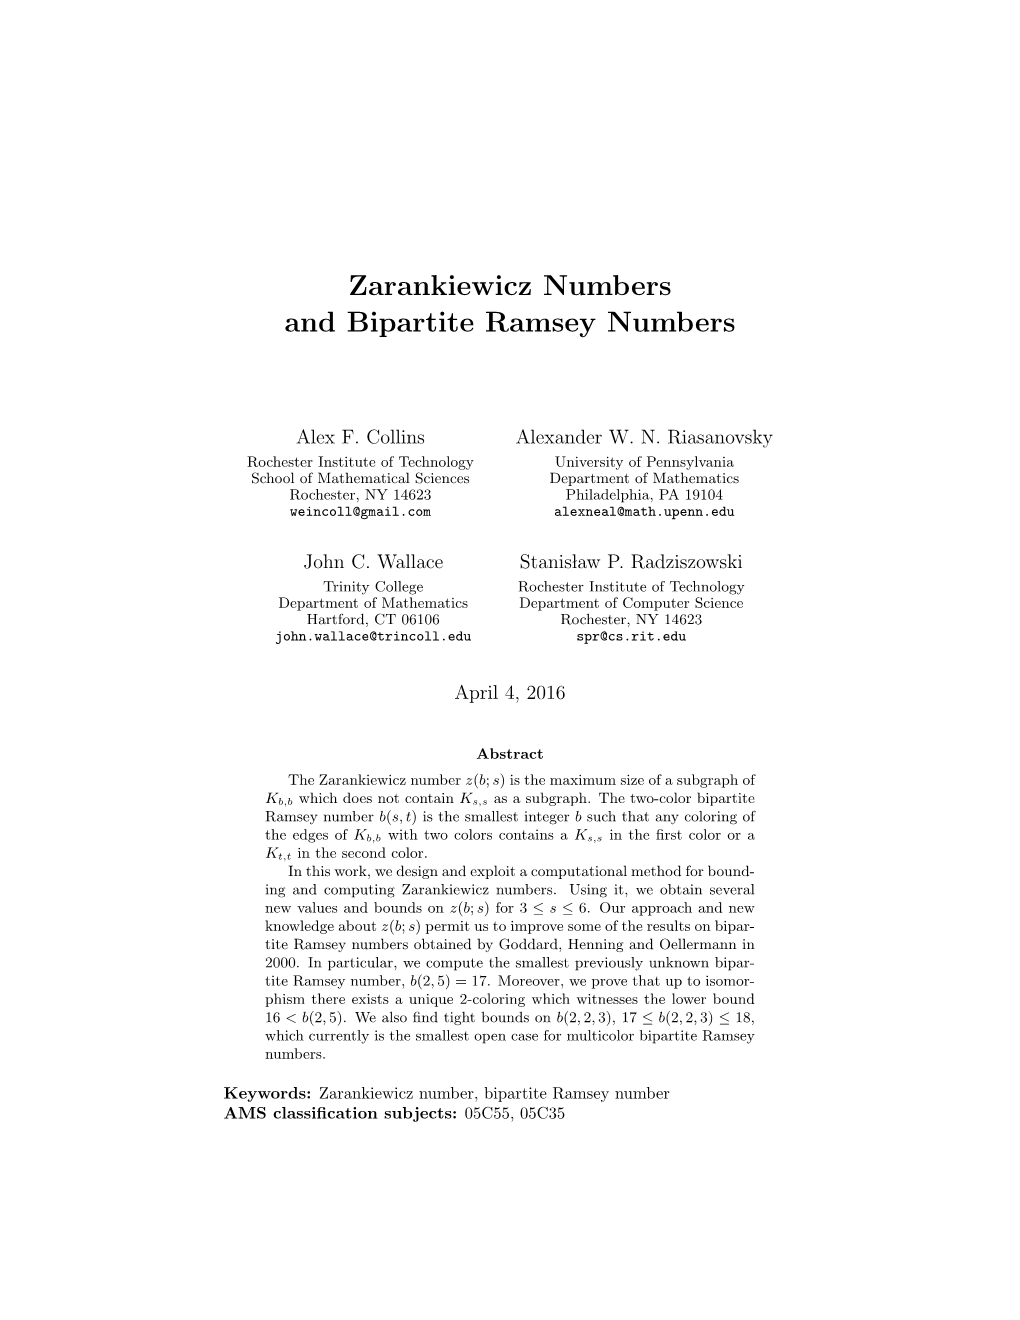 Zarankiewicz Numbers and Bipartite Ramsey Numbers